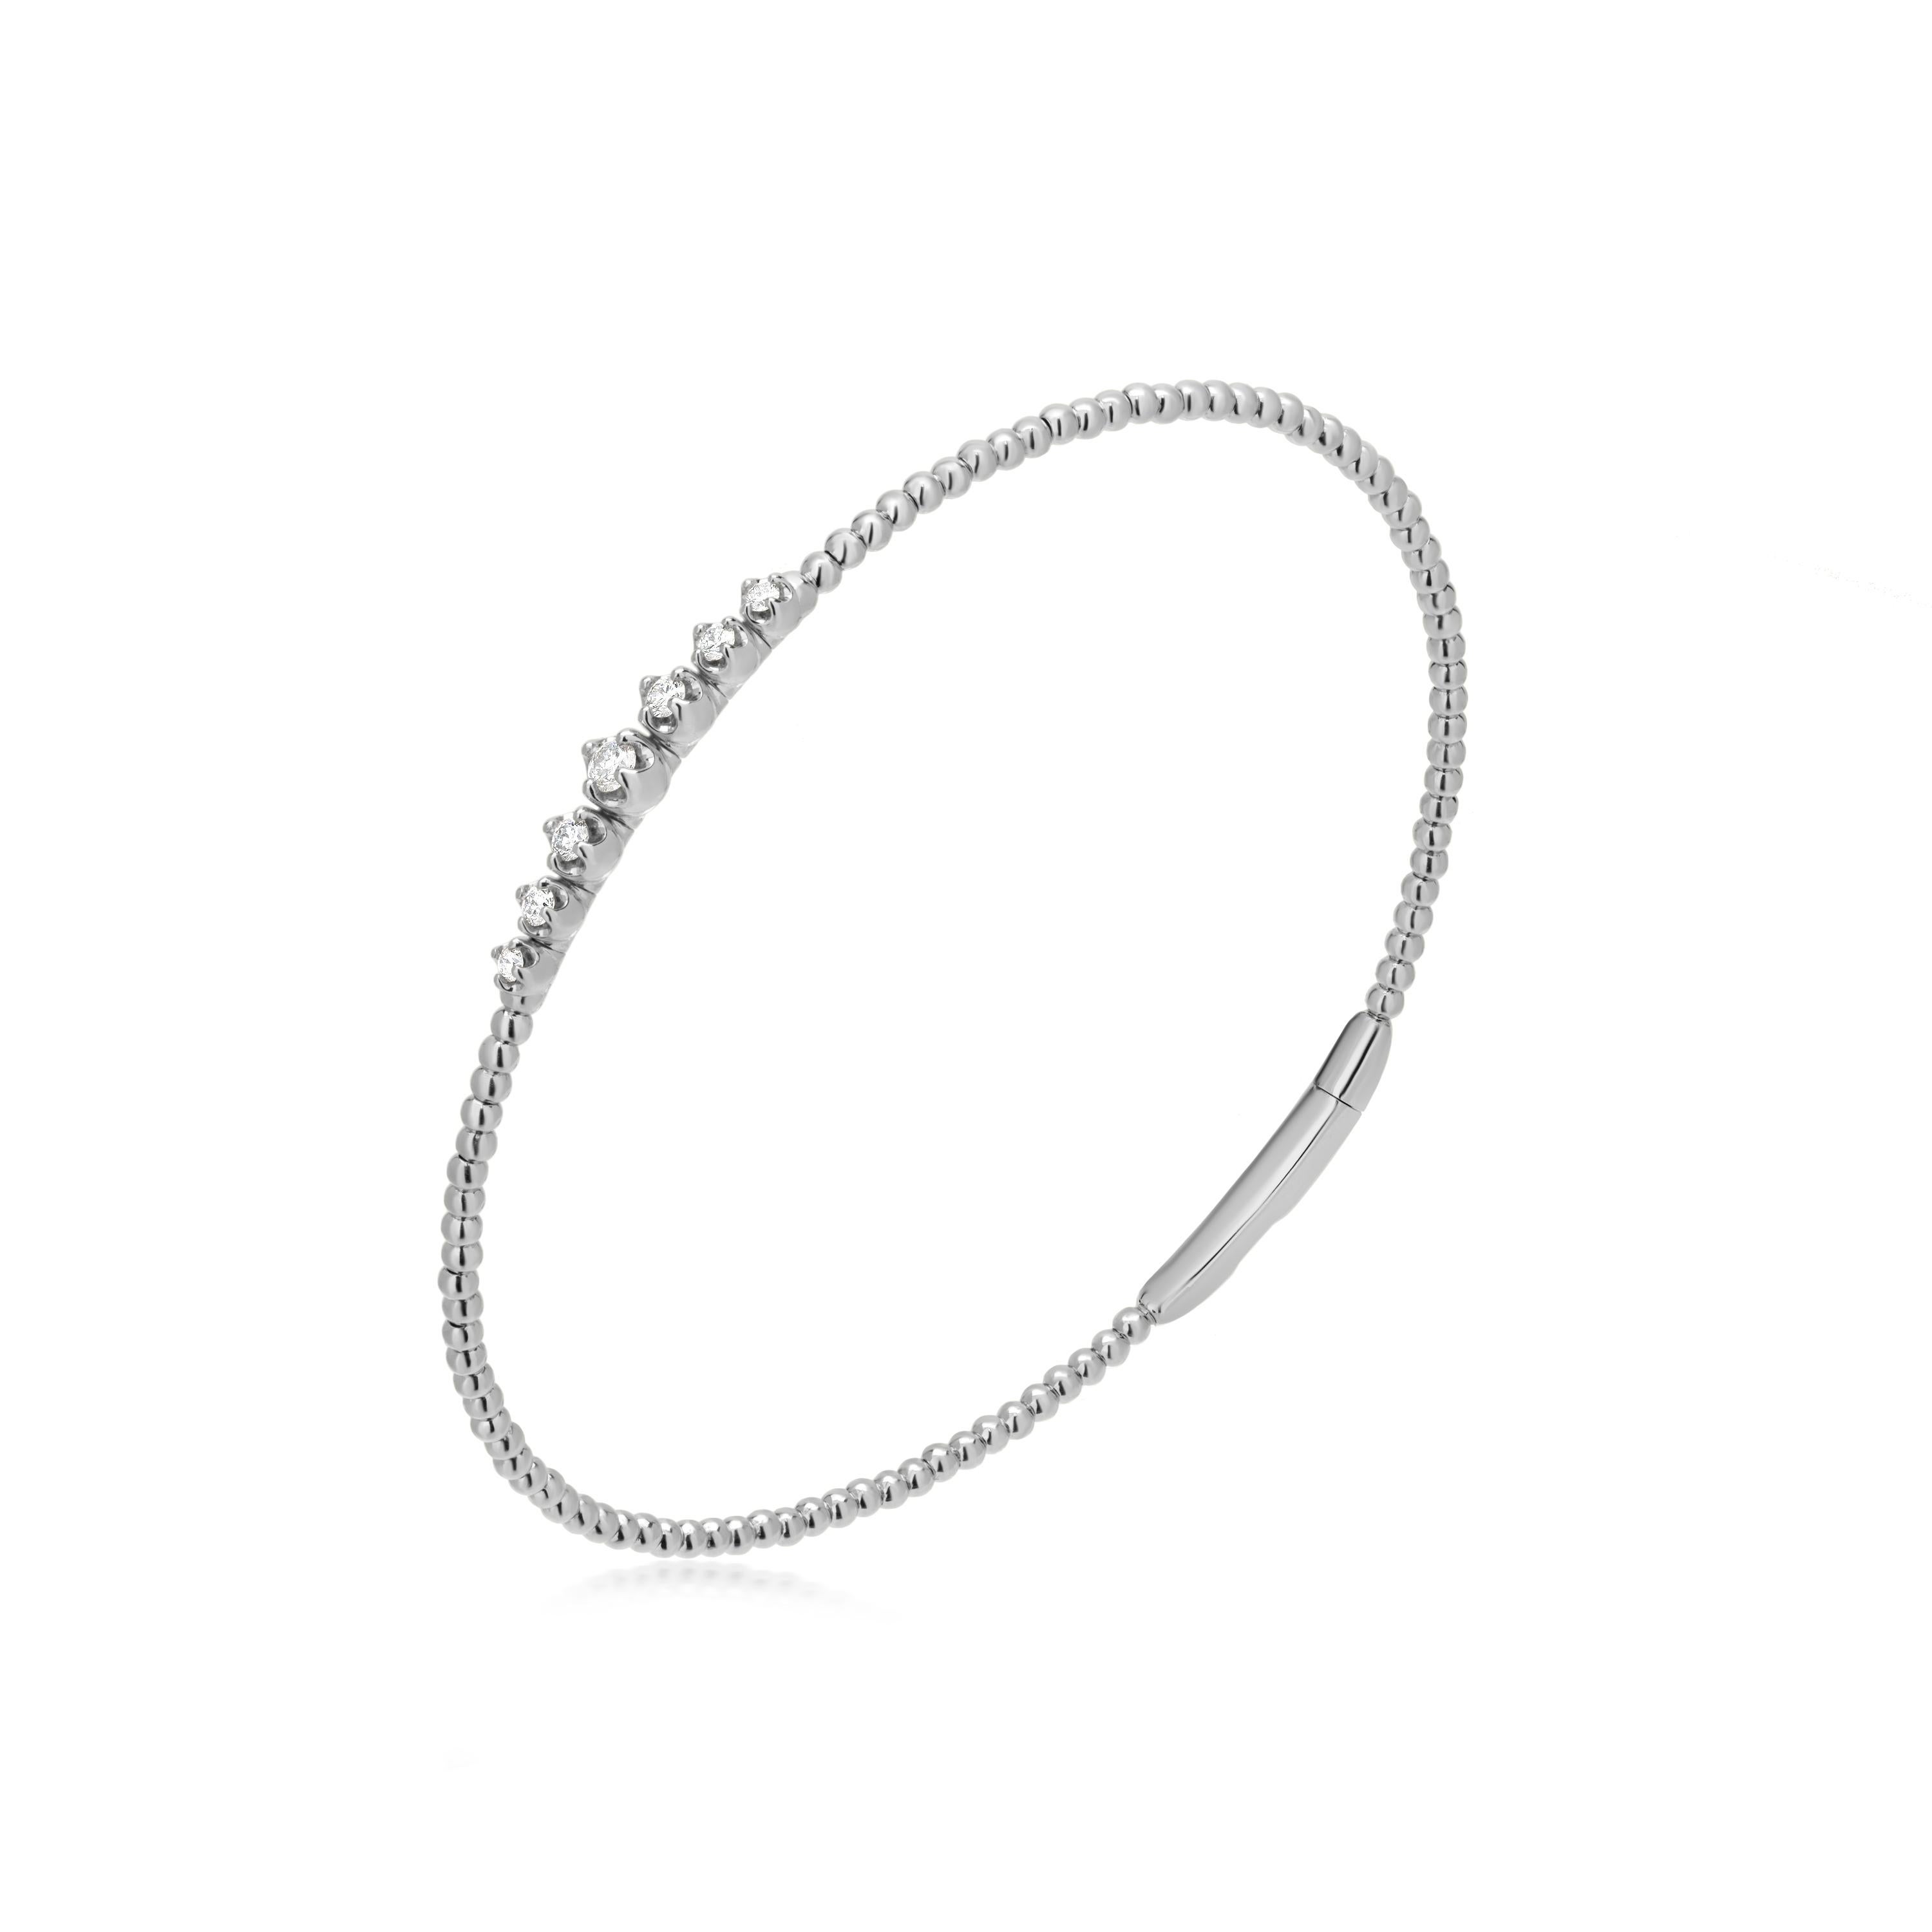 Introducing a stunning Luxle bangle bracelet, crafted with sophisticated style and elegance. This exquisite piece features a graduated diamond setting at its center, where each diamond is prong set to shimmer and shine. The diamonds are round